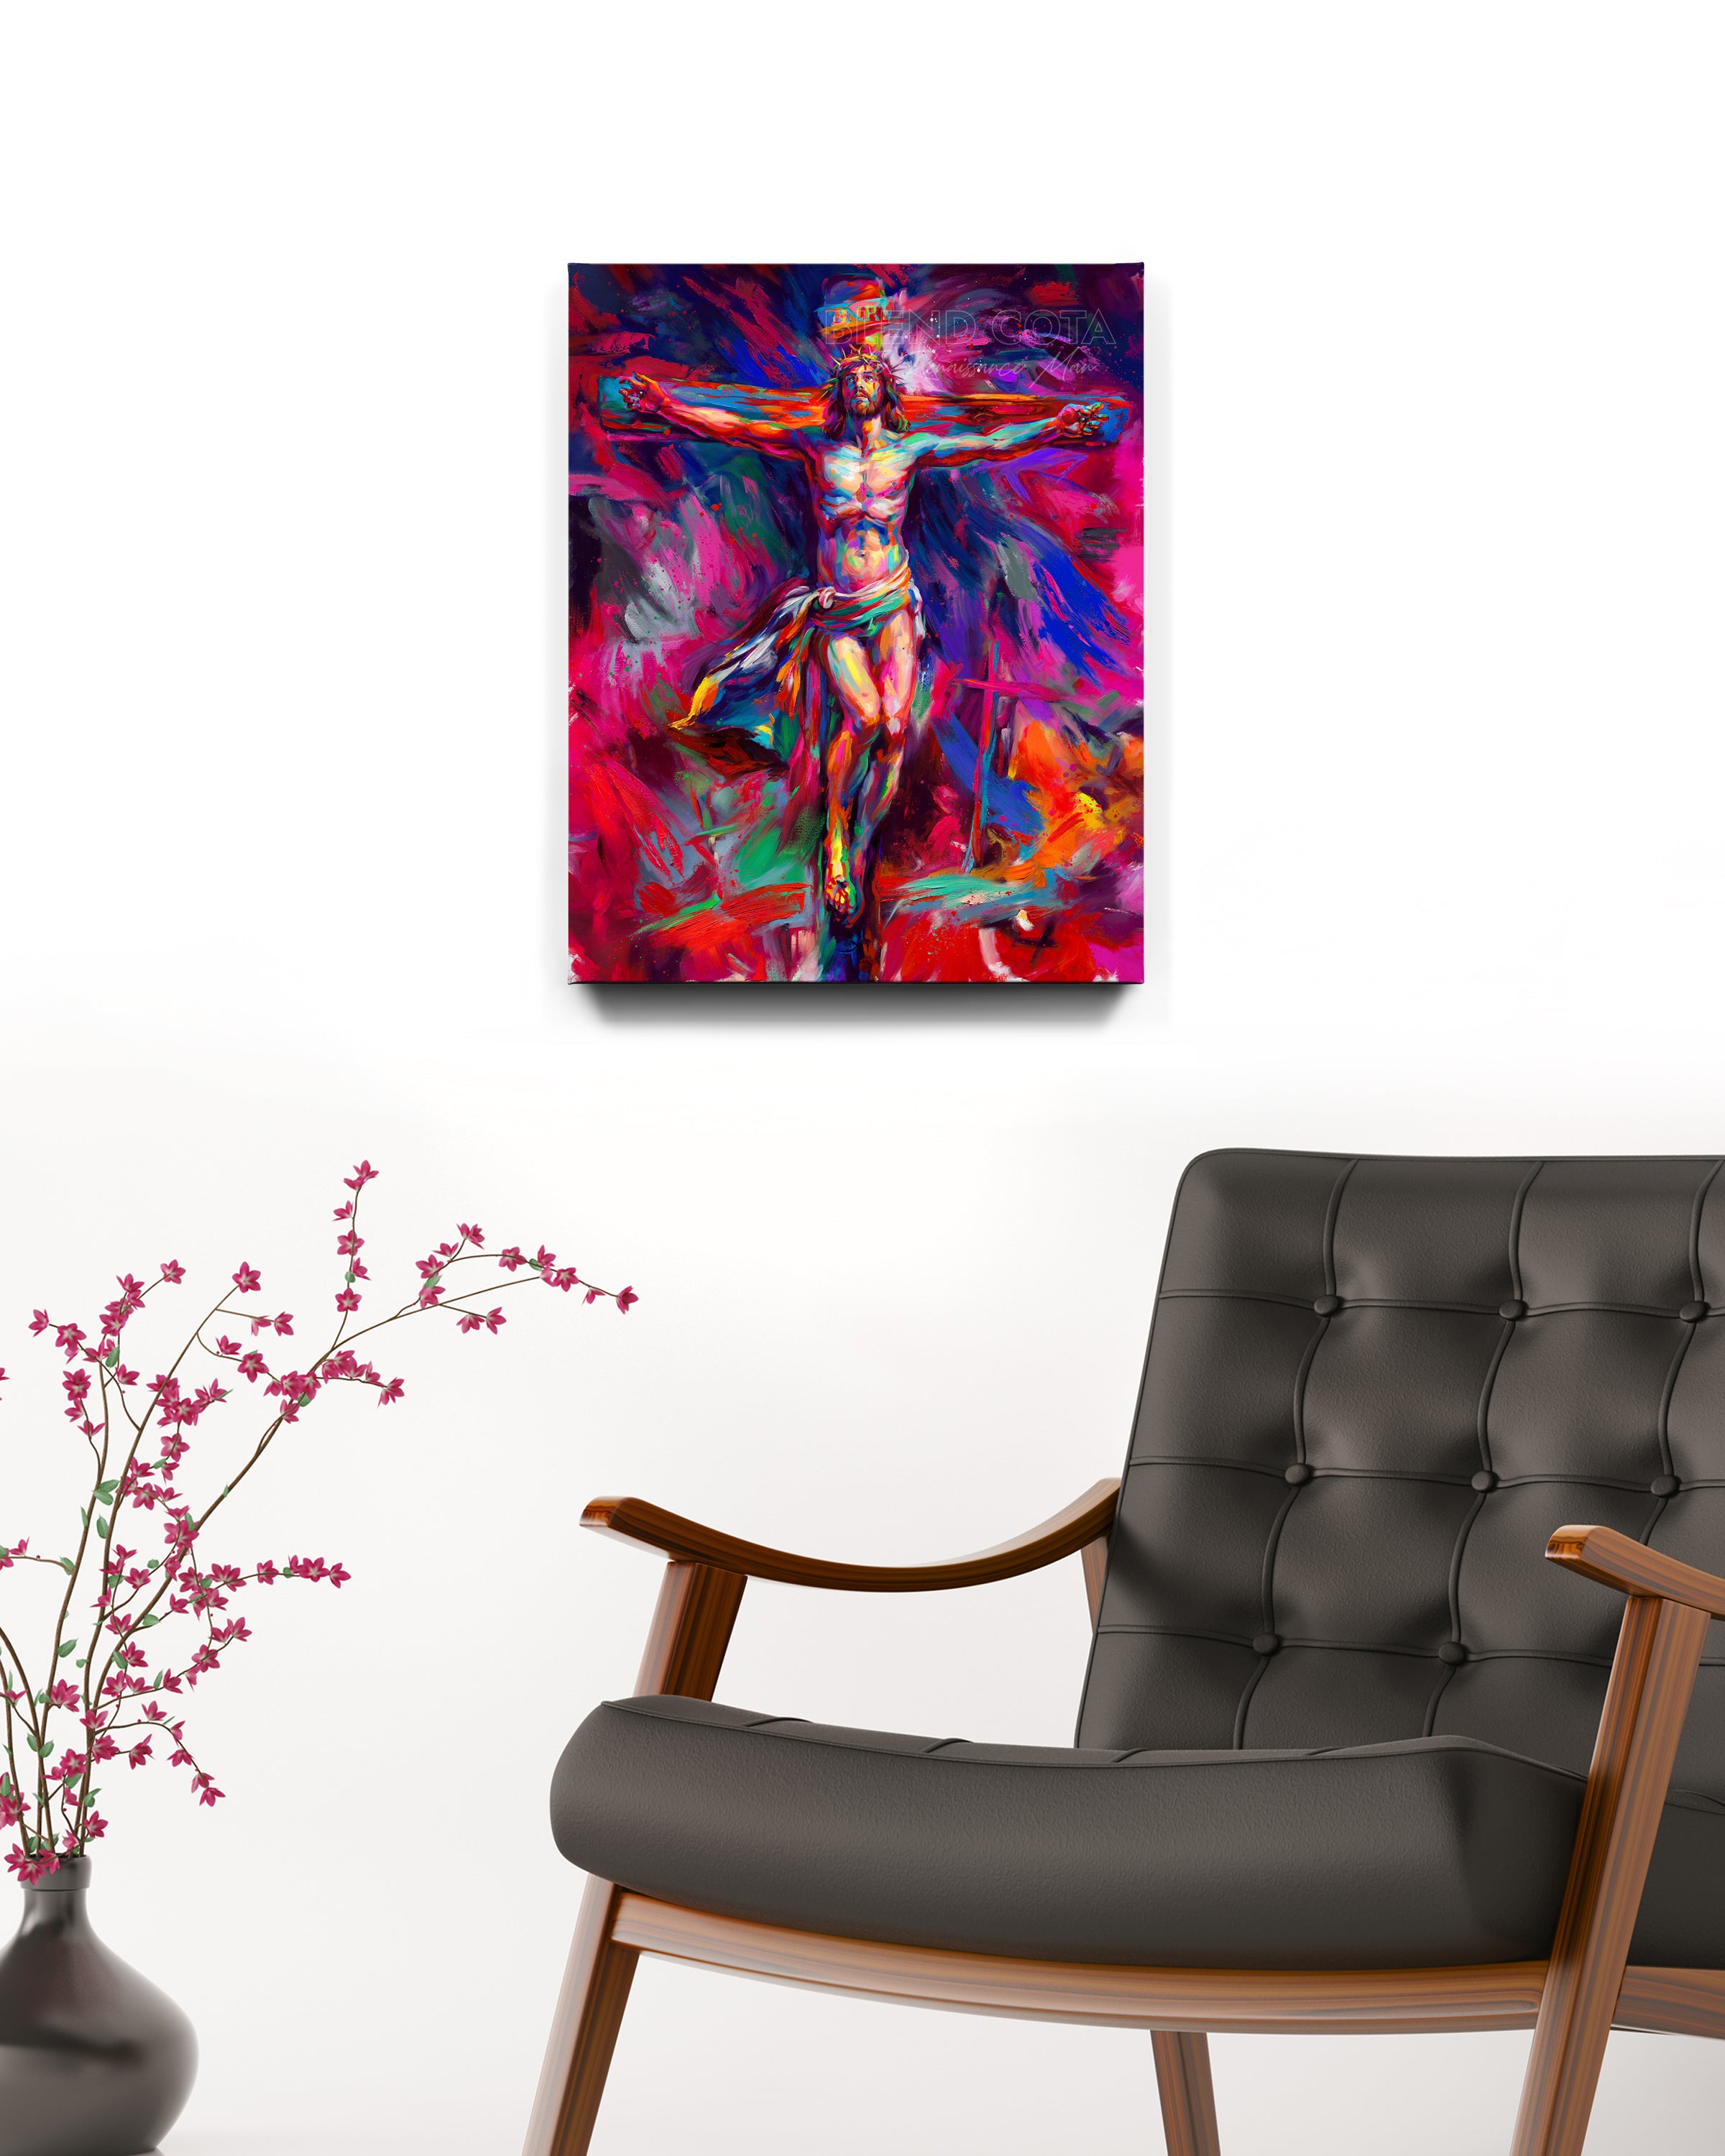 For The Love of God | Jesus Crucifixion - Blend Cota Art Print on Canvas- Blend Cota Studios painting hanging on a white wall behind a black leather armchair